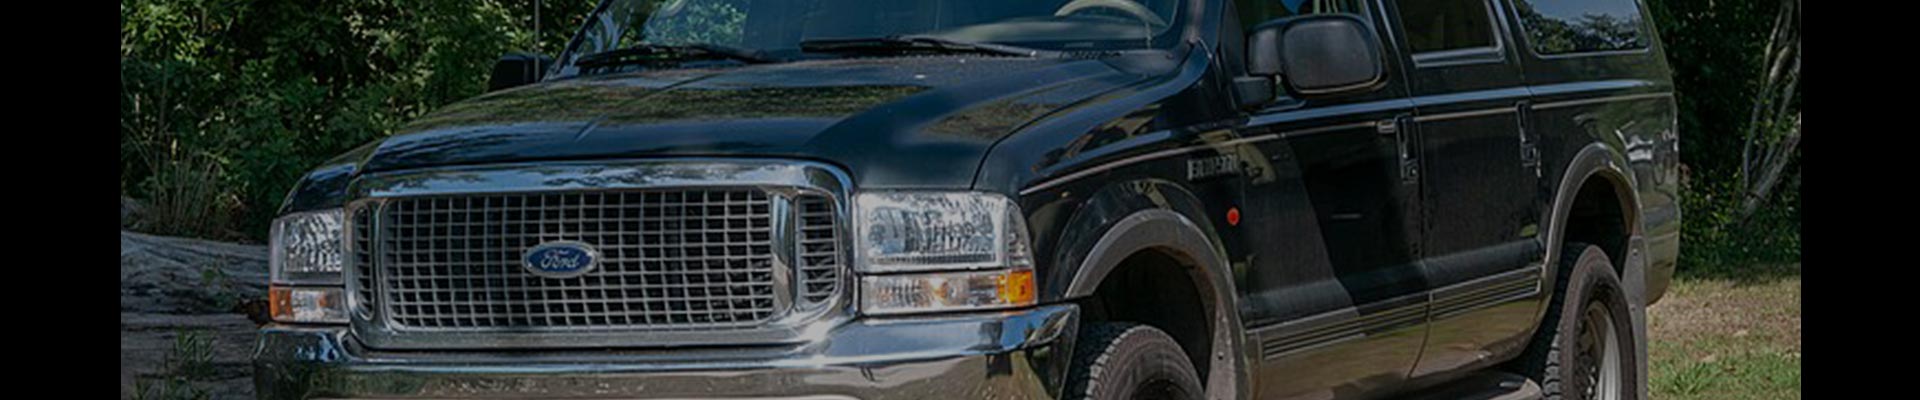 Parts for 2003 Ford Excursion